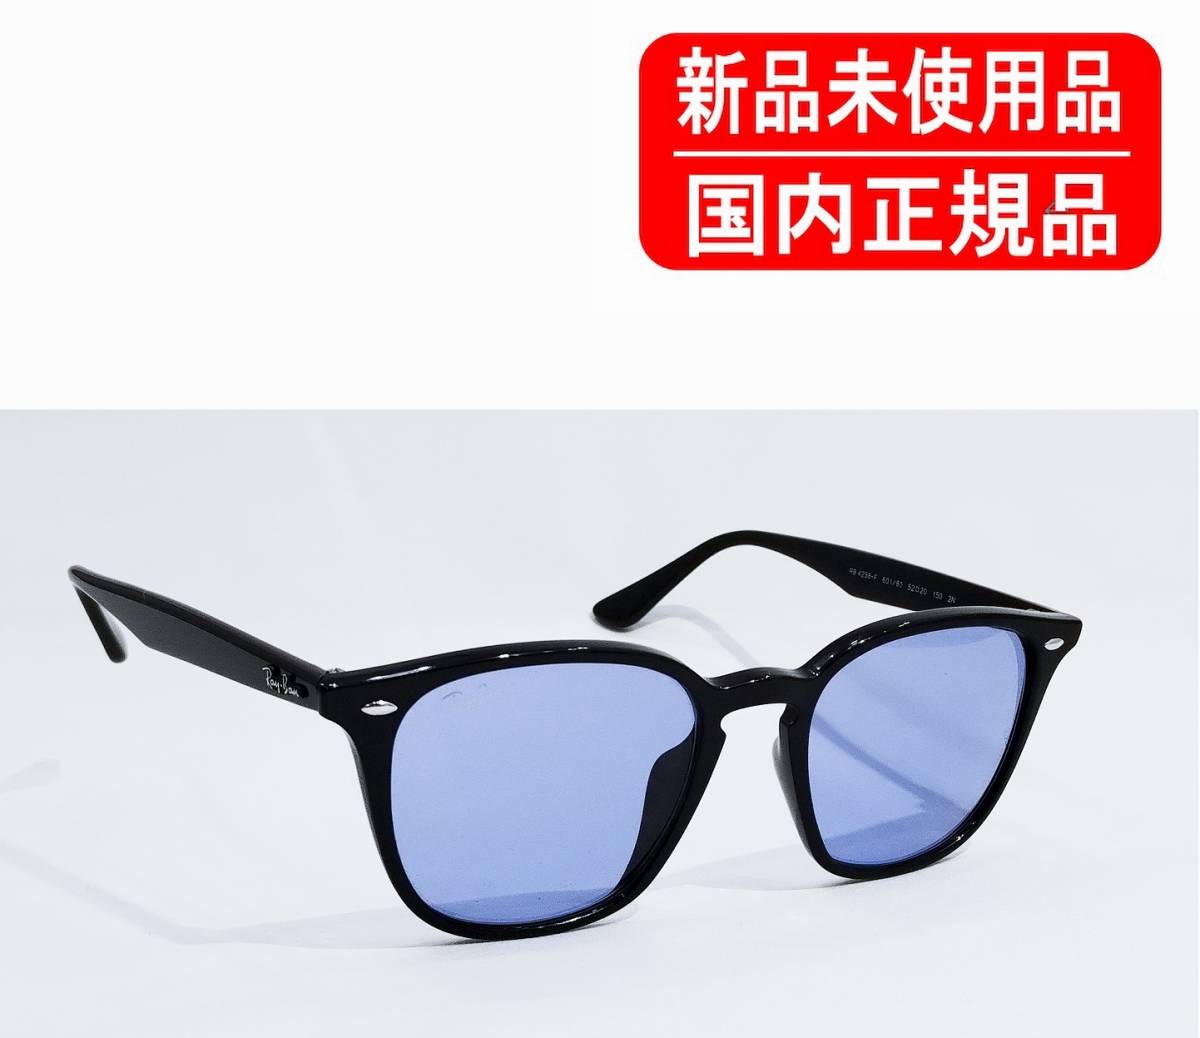 RB4258F 601/80 52-20 国内正規品 Ray-Ban レイバン WASHED LENSES ライトブルー 正規保証書付き